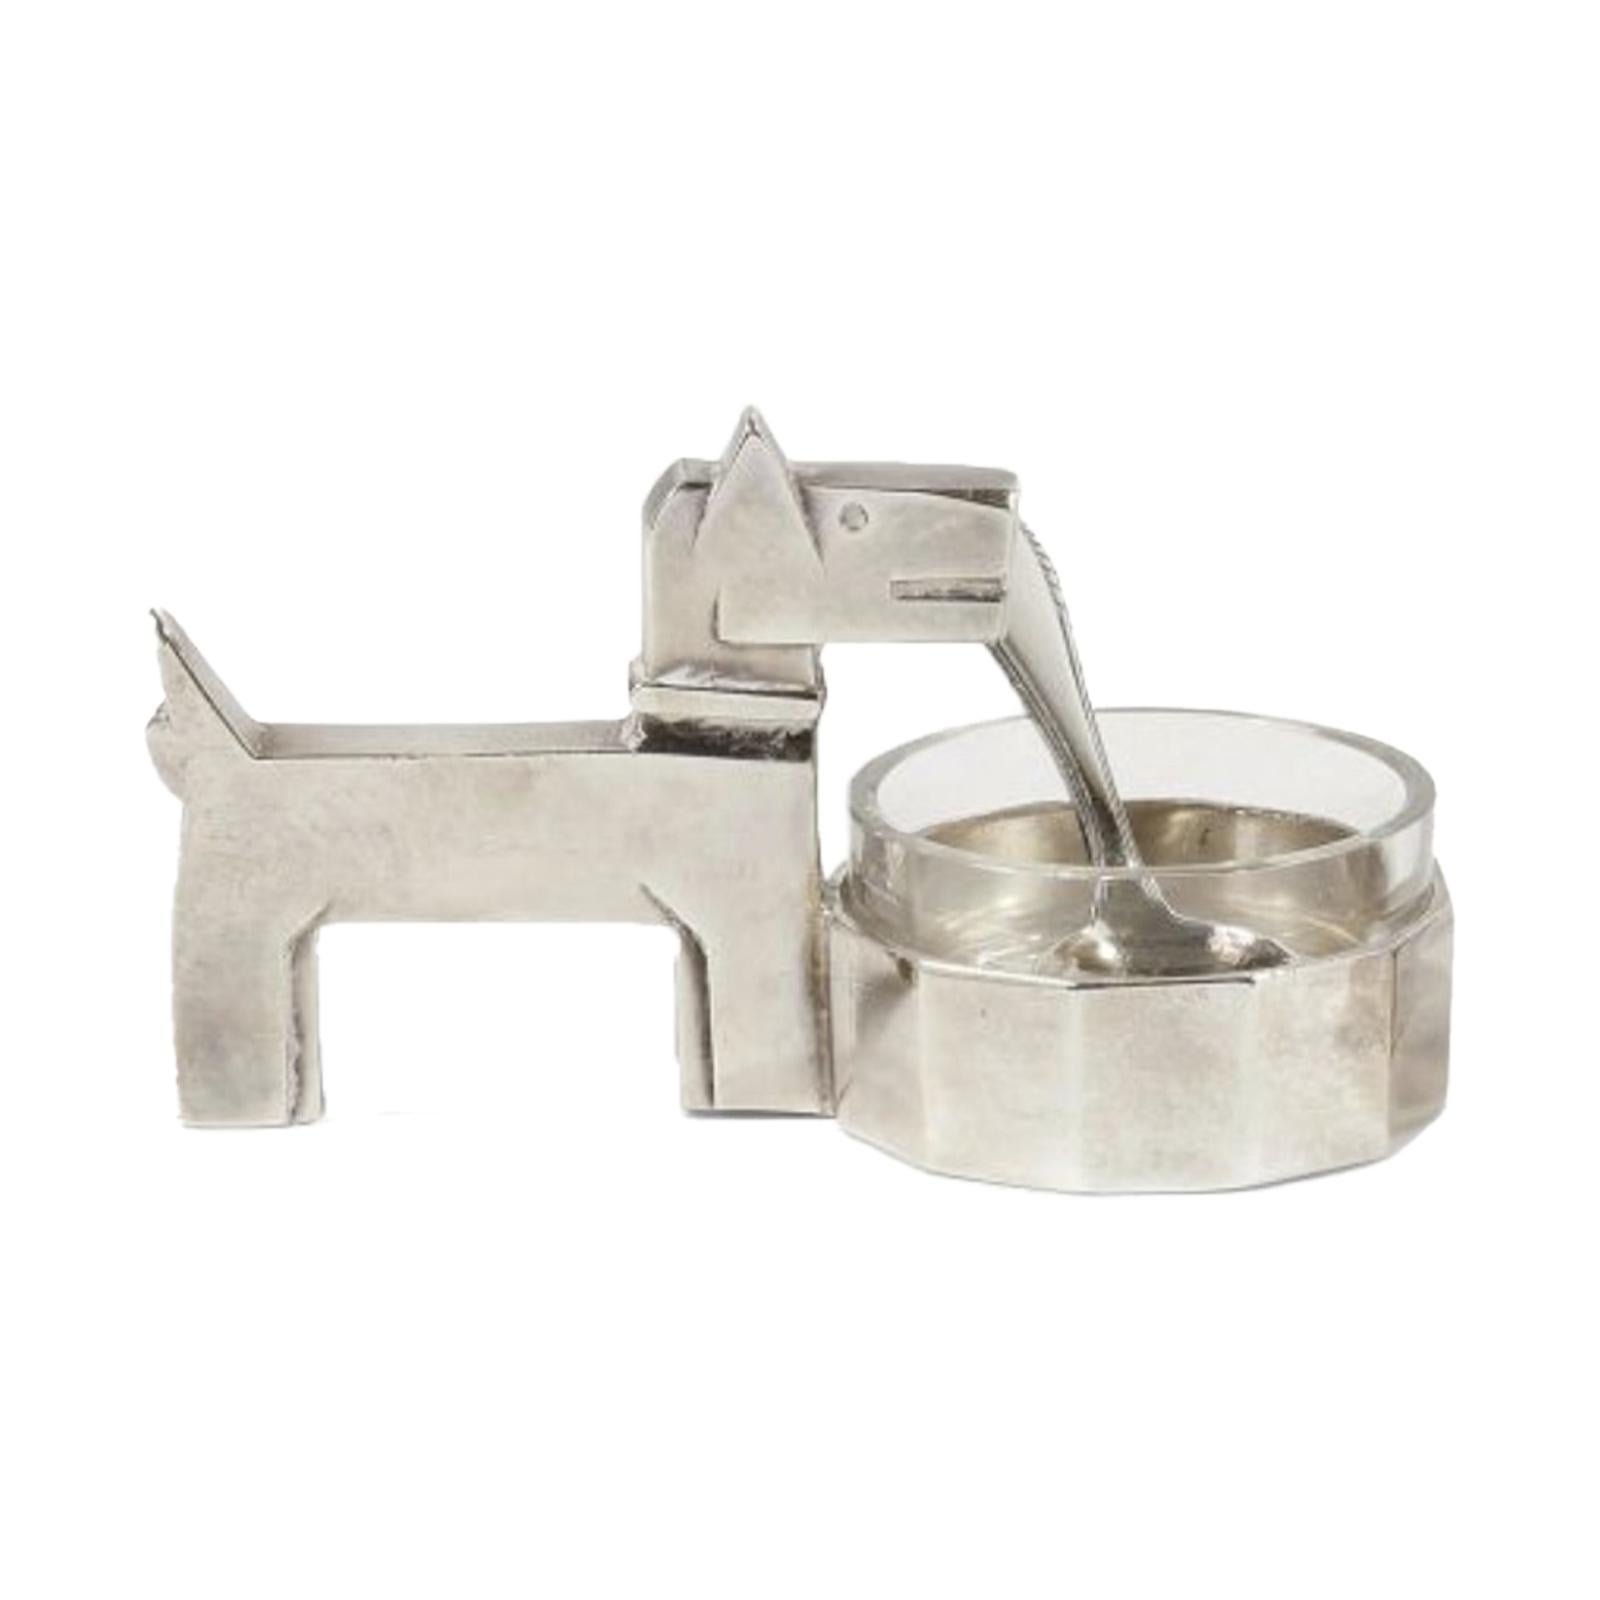 Marcel SANDOZ for CHRISTOFLE.
Pair of silver-plated salt pans in the shape of a dog in front of their bowl with two salt shovels.
White crystal interiors. In their niche-shaped case marked goldsmith GALLIA.
Height salt cellars: 5 and 5.8 cm
Box: